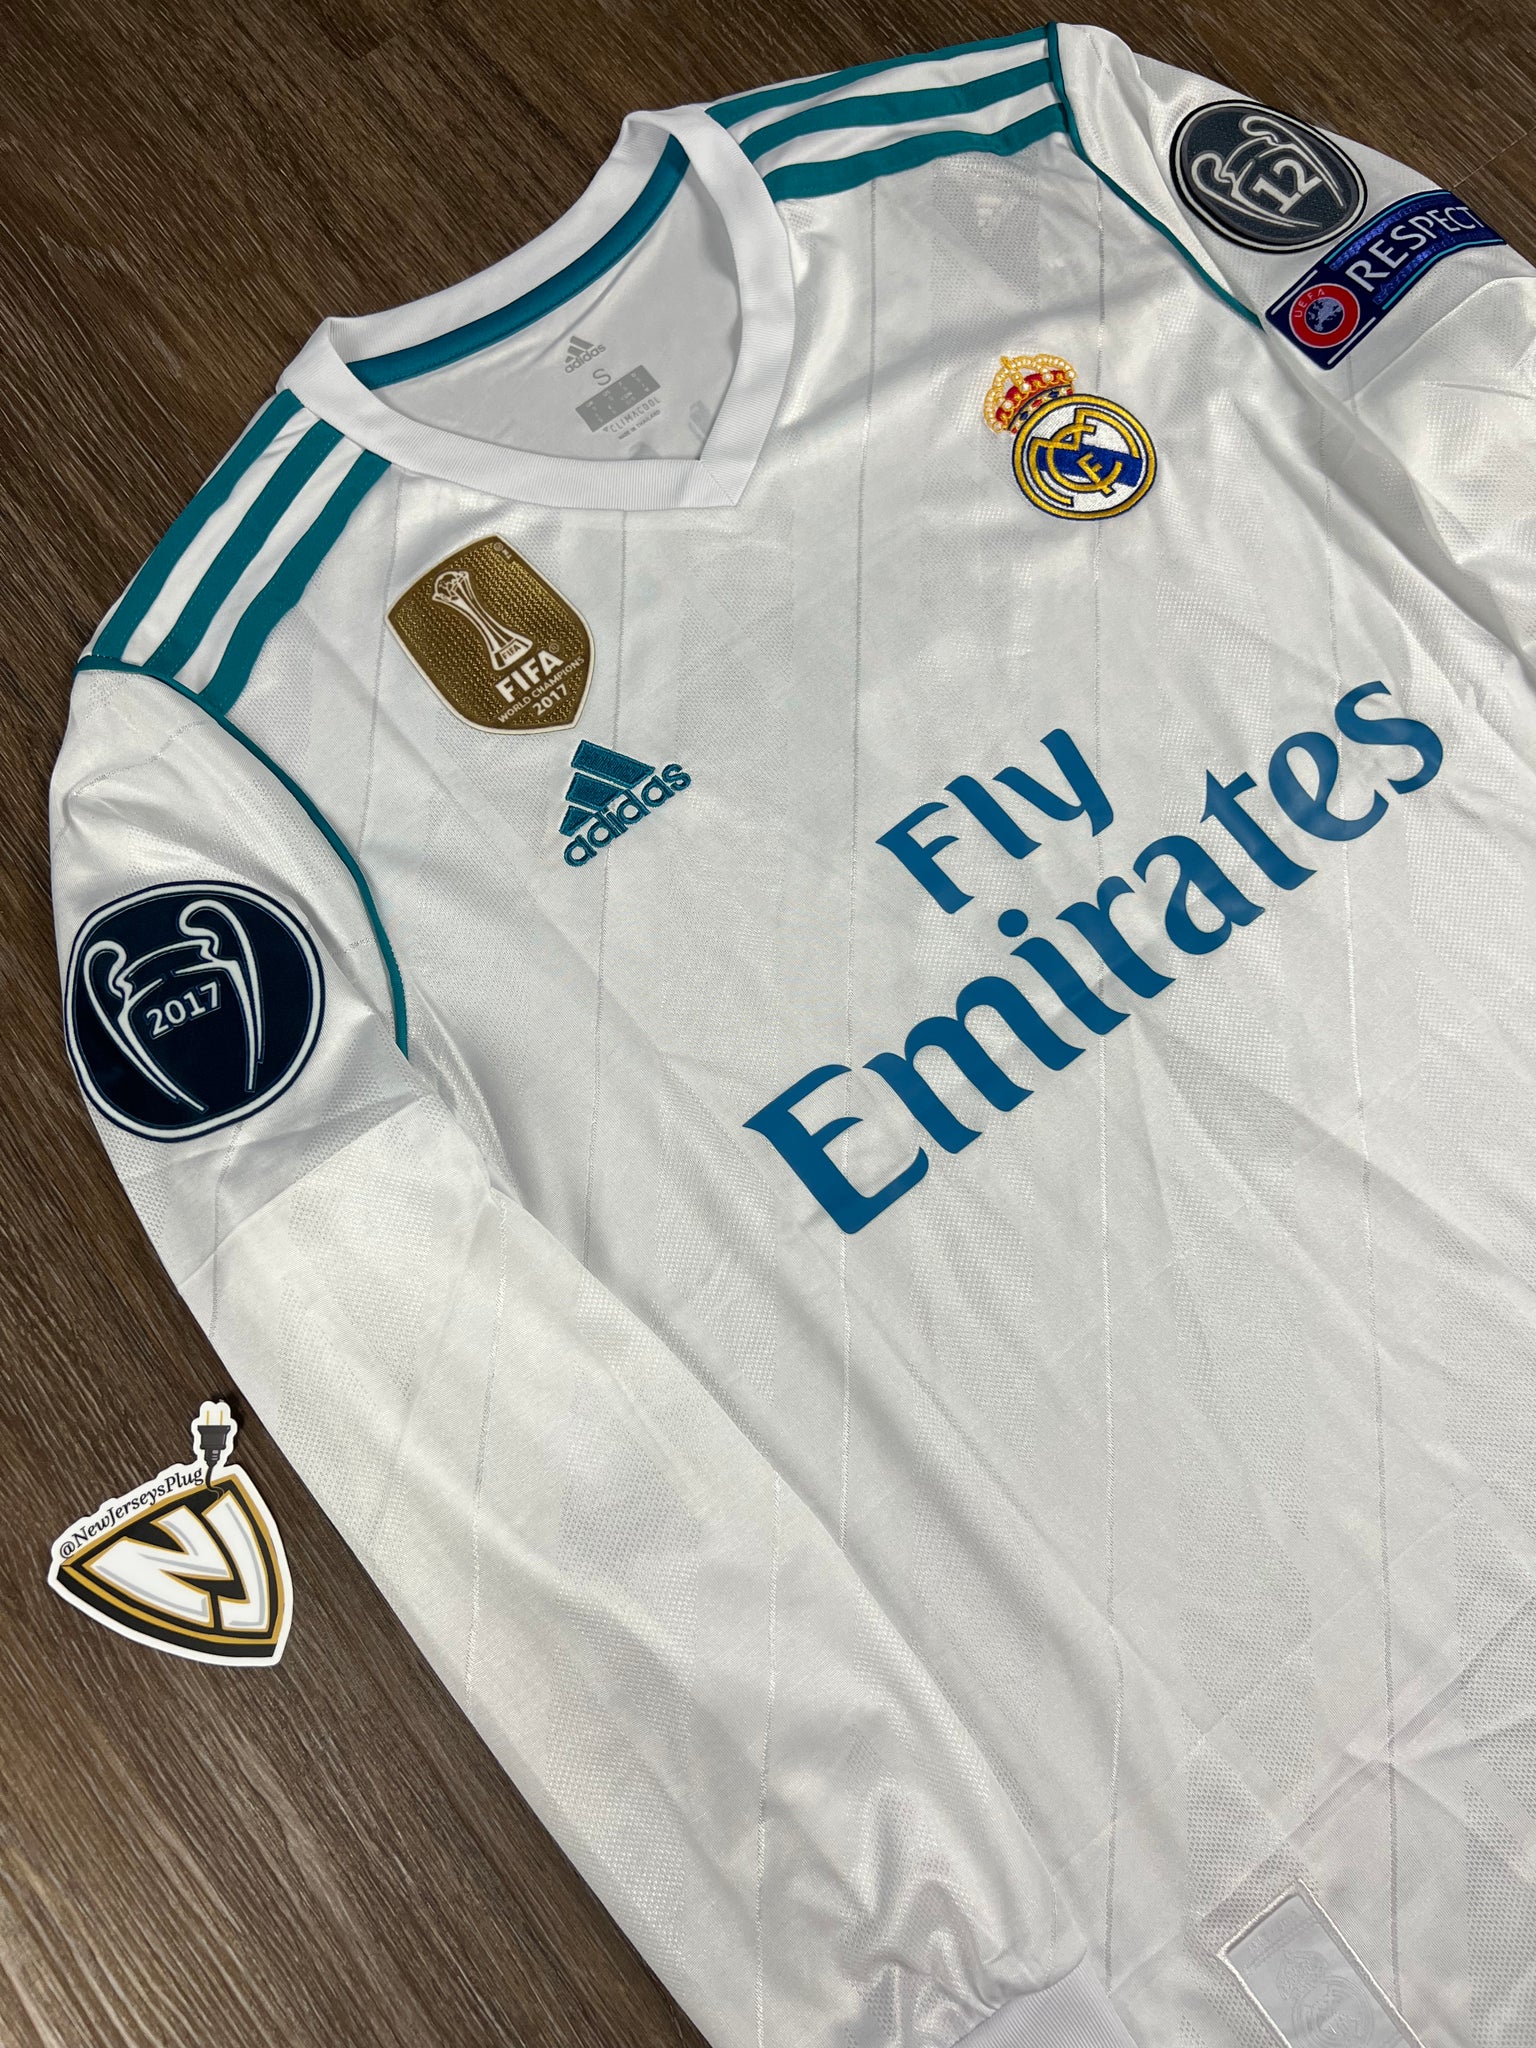 Real Madrid Third Jersey 17/18 Soccer Kit Champions League